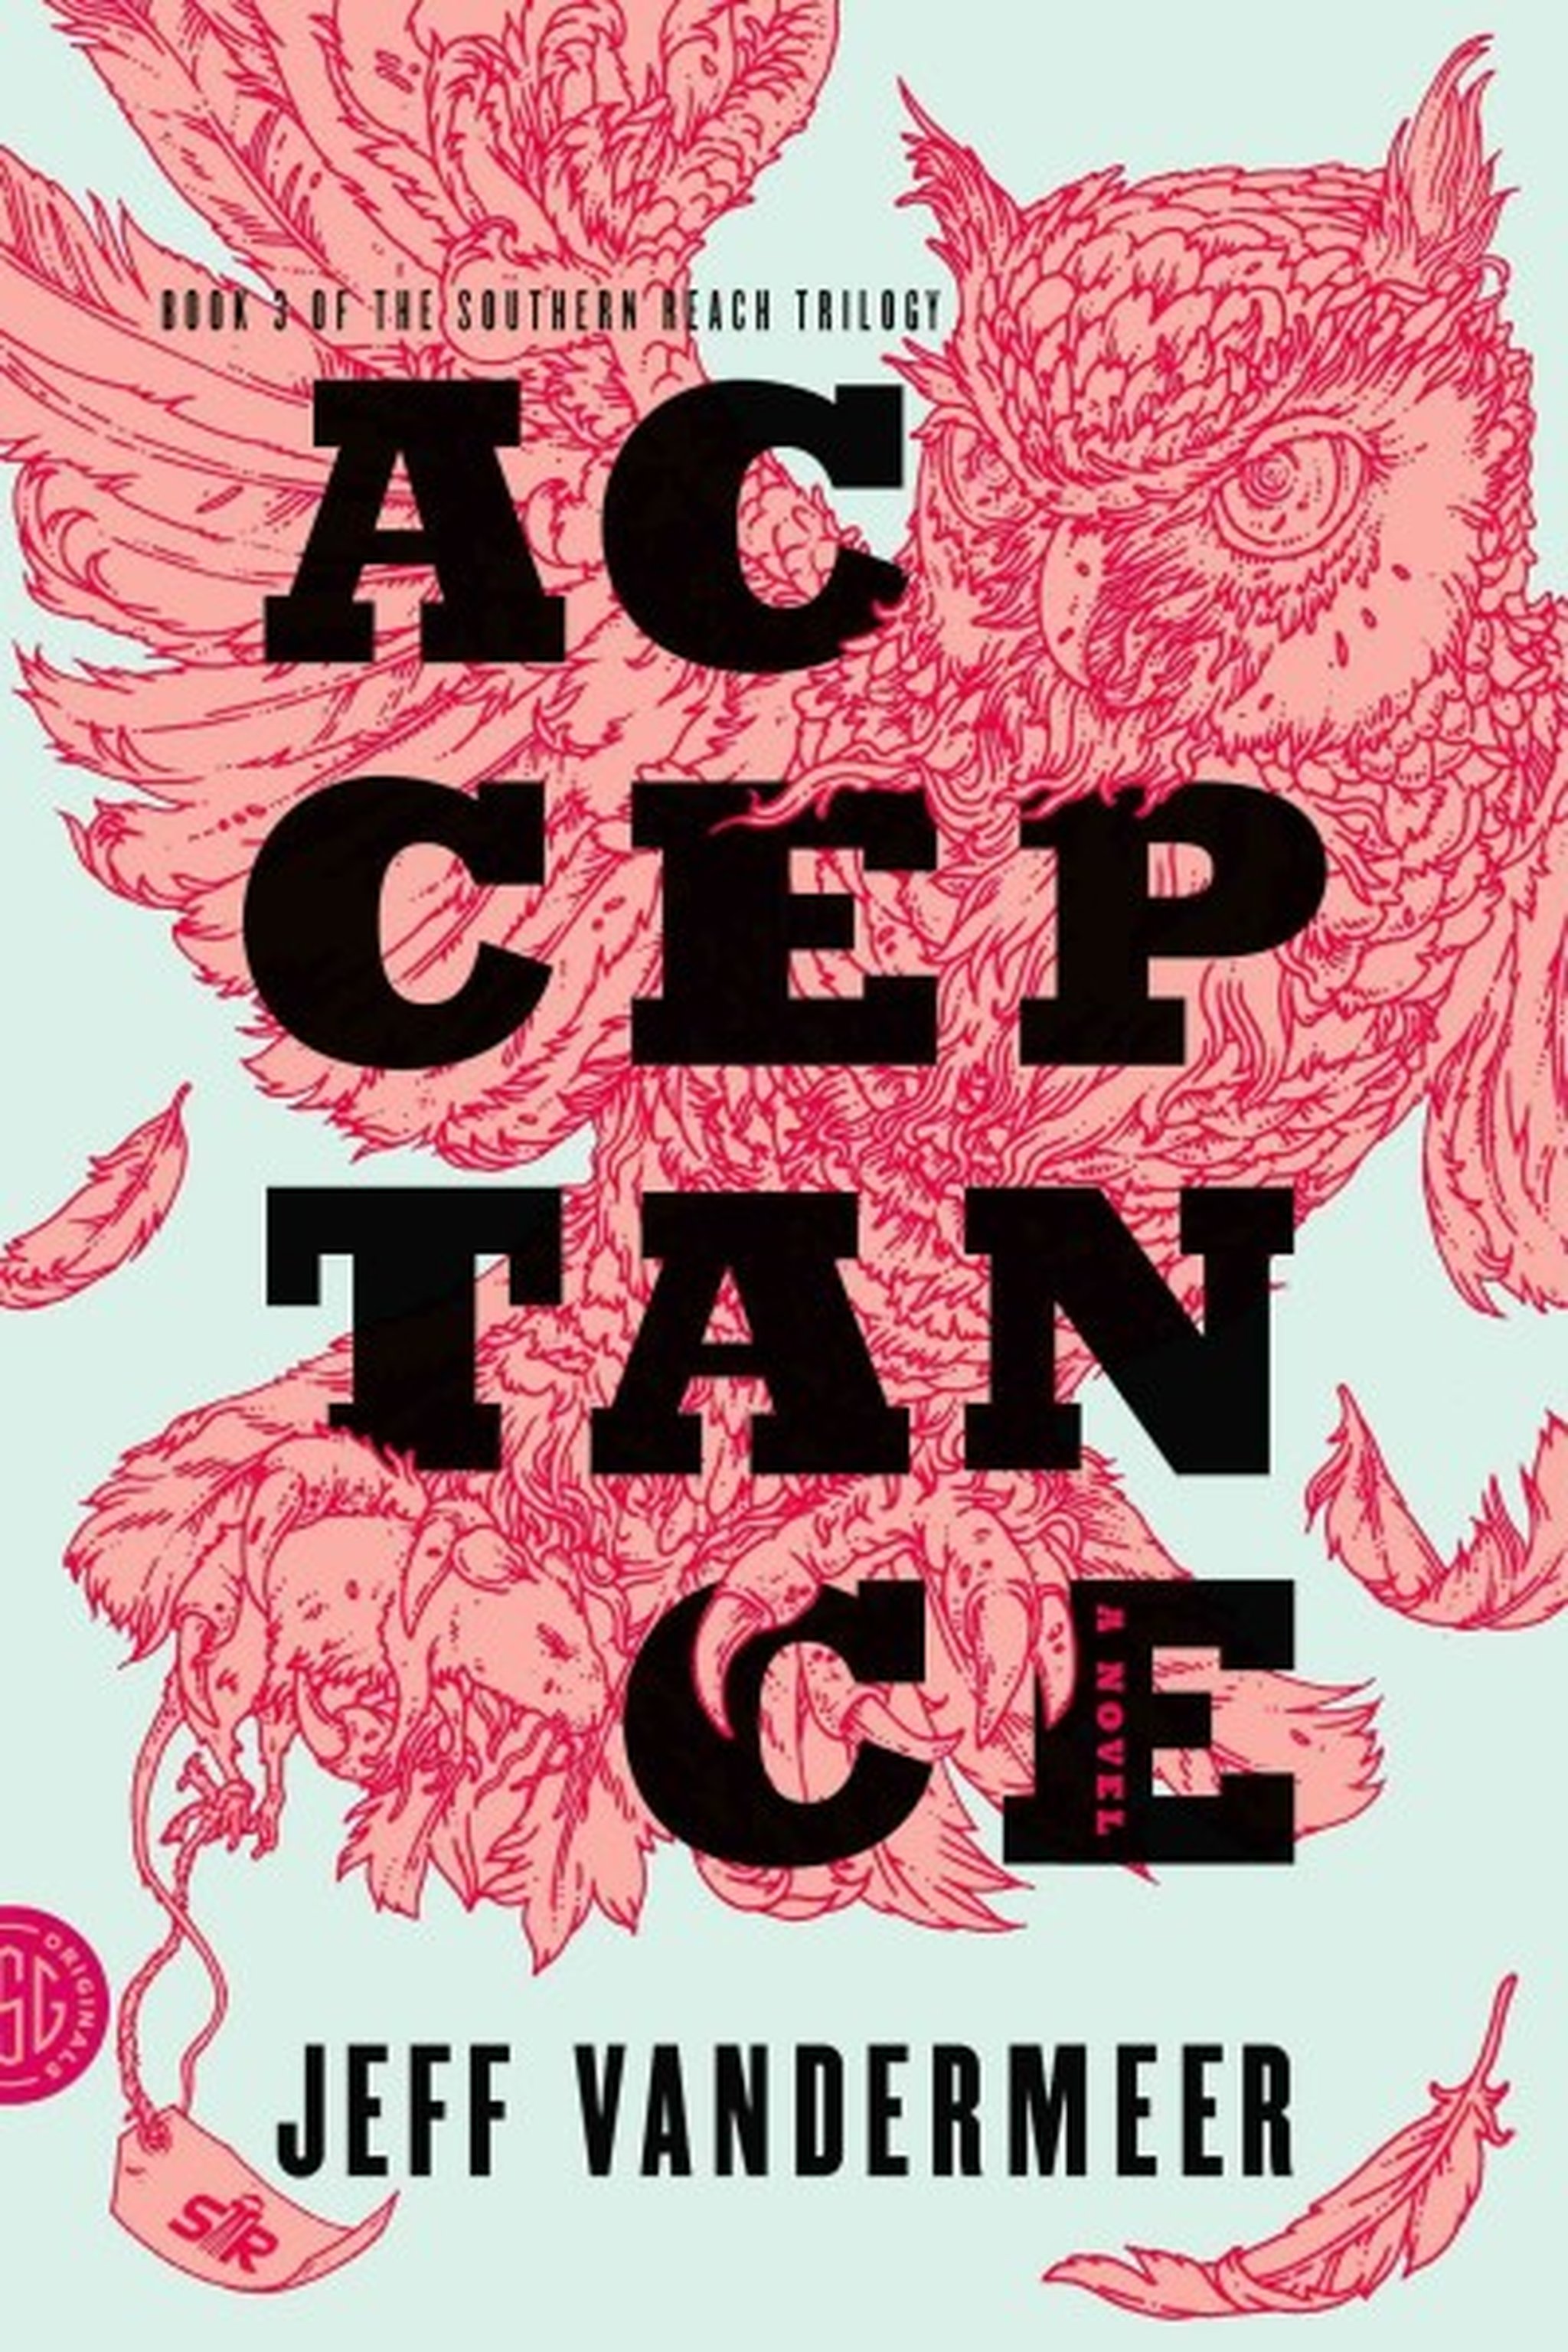 Cover art for the novel Acceptance, featuring the word "Acceptance" printed over a pink, stylized owl.